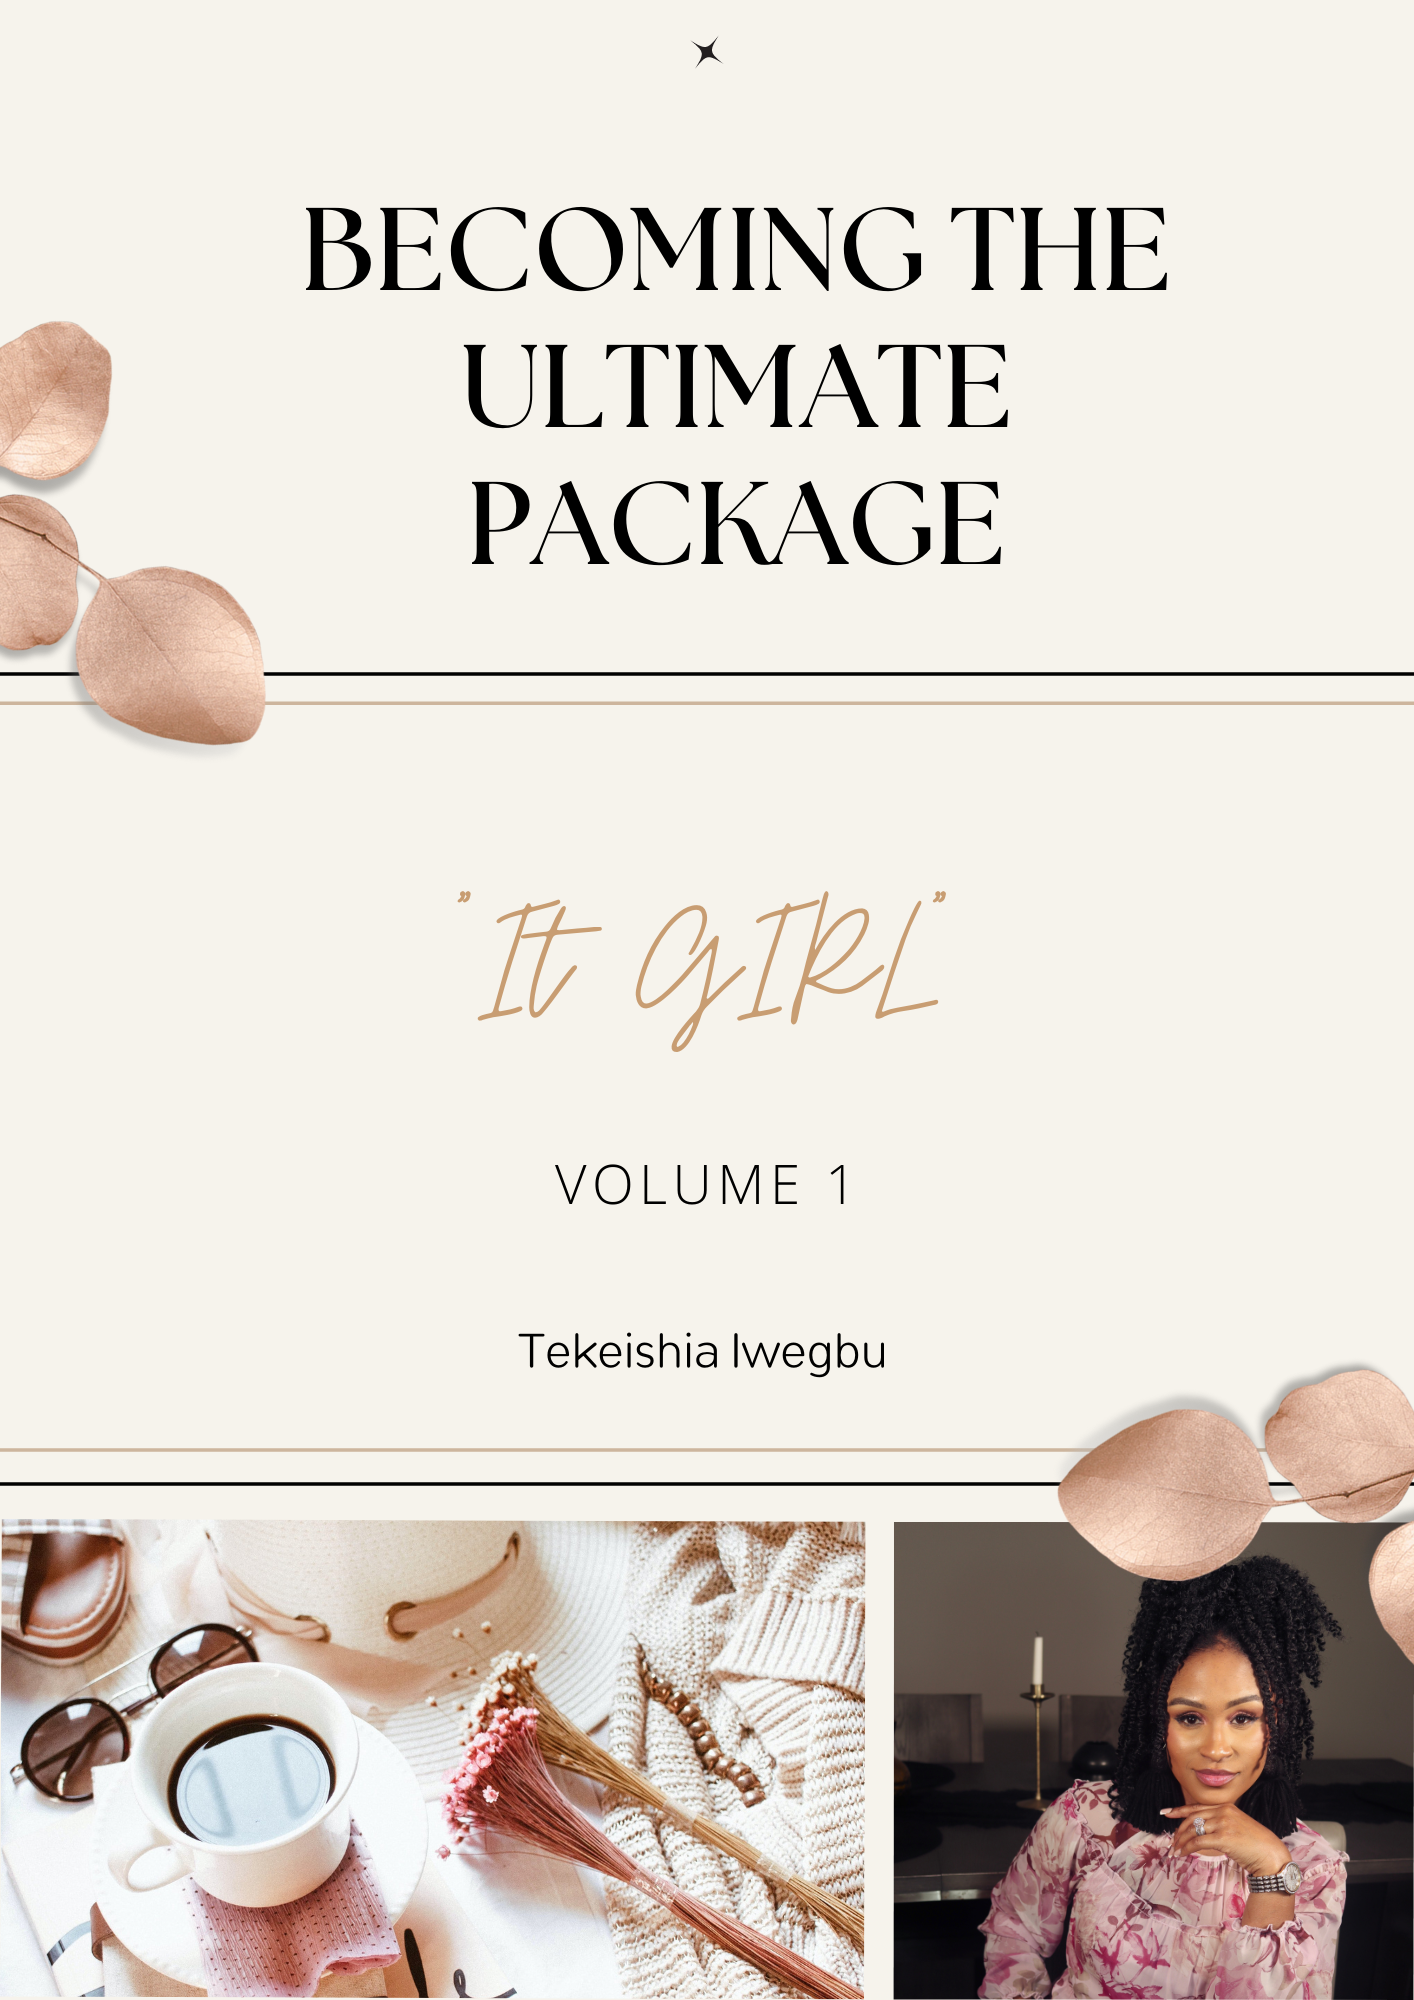 Becoming The Ultimate Package "IT GIRL" Vol. 1